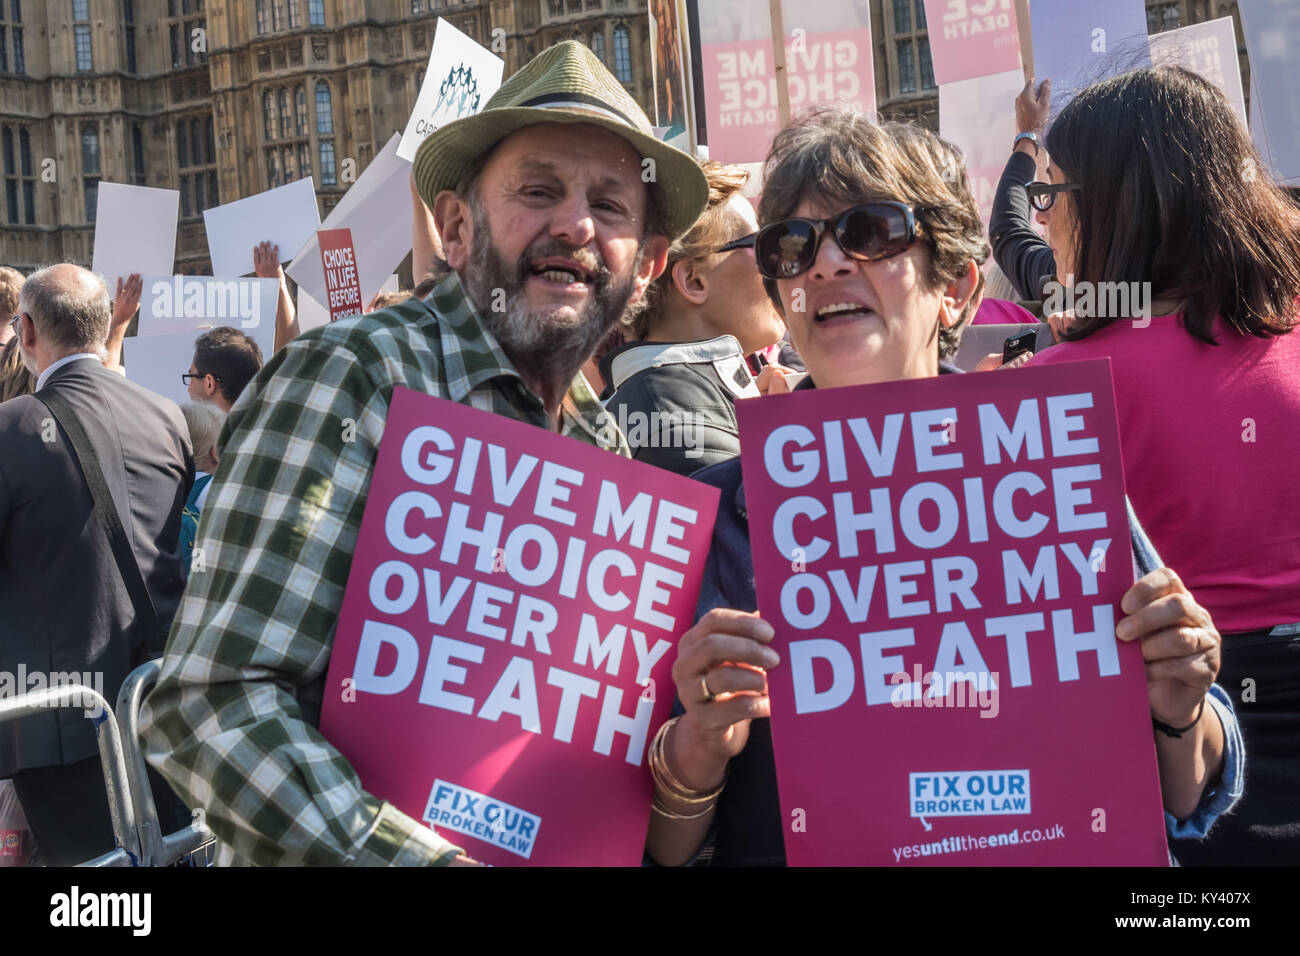 Supporters of the Assisted Suicide Bill in Old Palace Yard  debated in Parliament with posters  'Give Me Choice over My Death'. Stock Photo